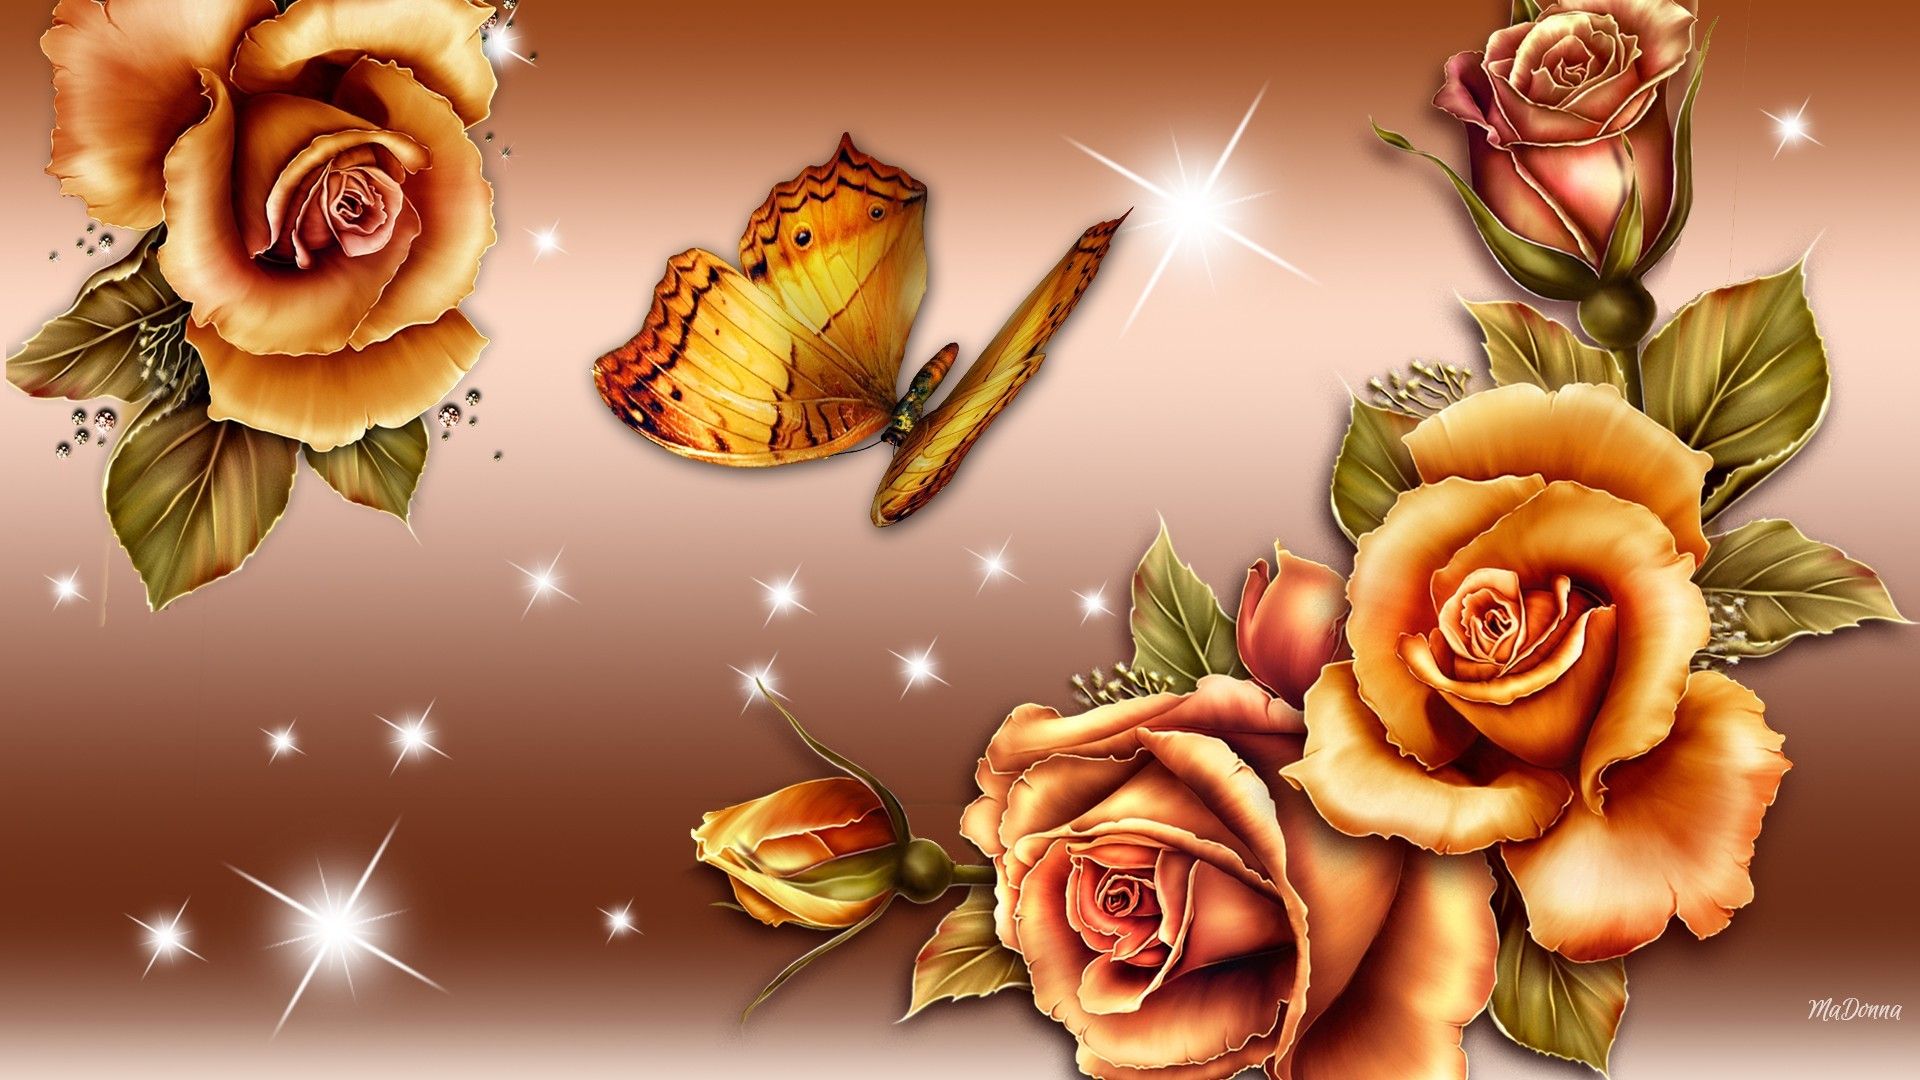 Free download Rose And Butterfly Wallpaper 57 Picture 1920x1080